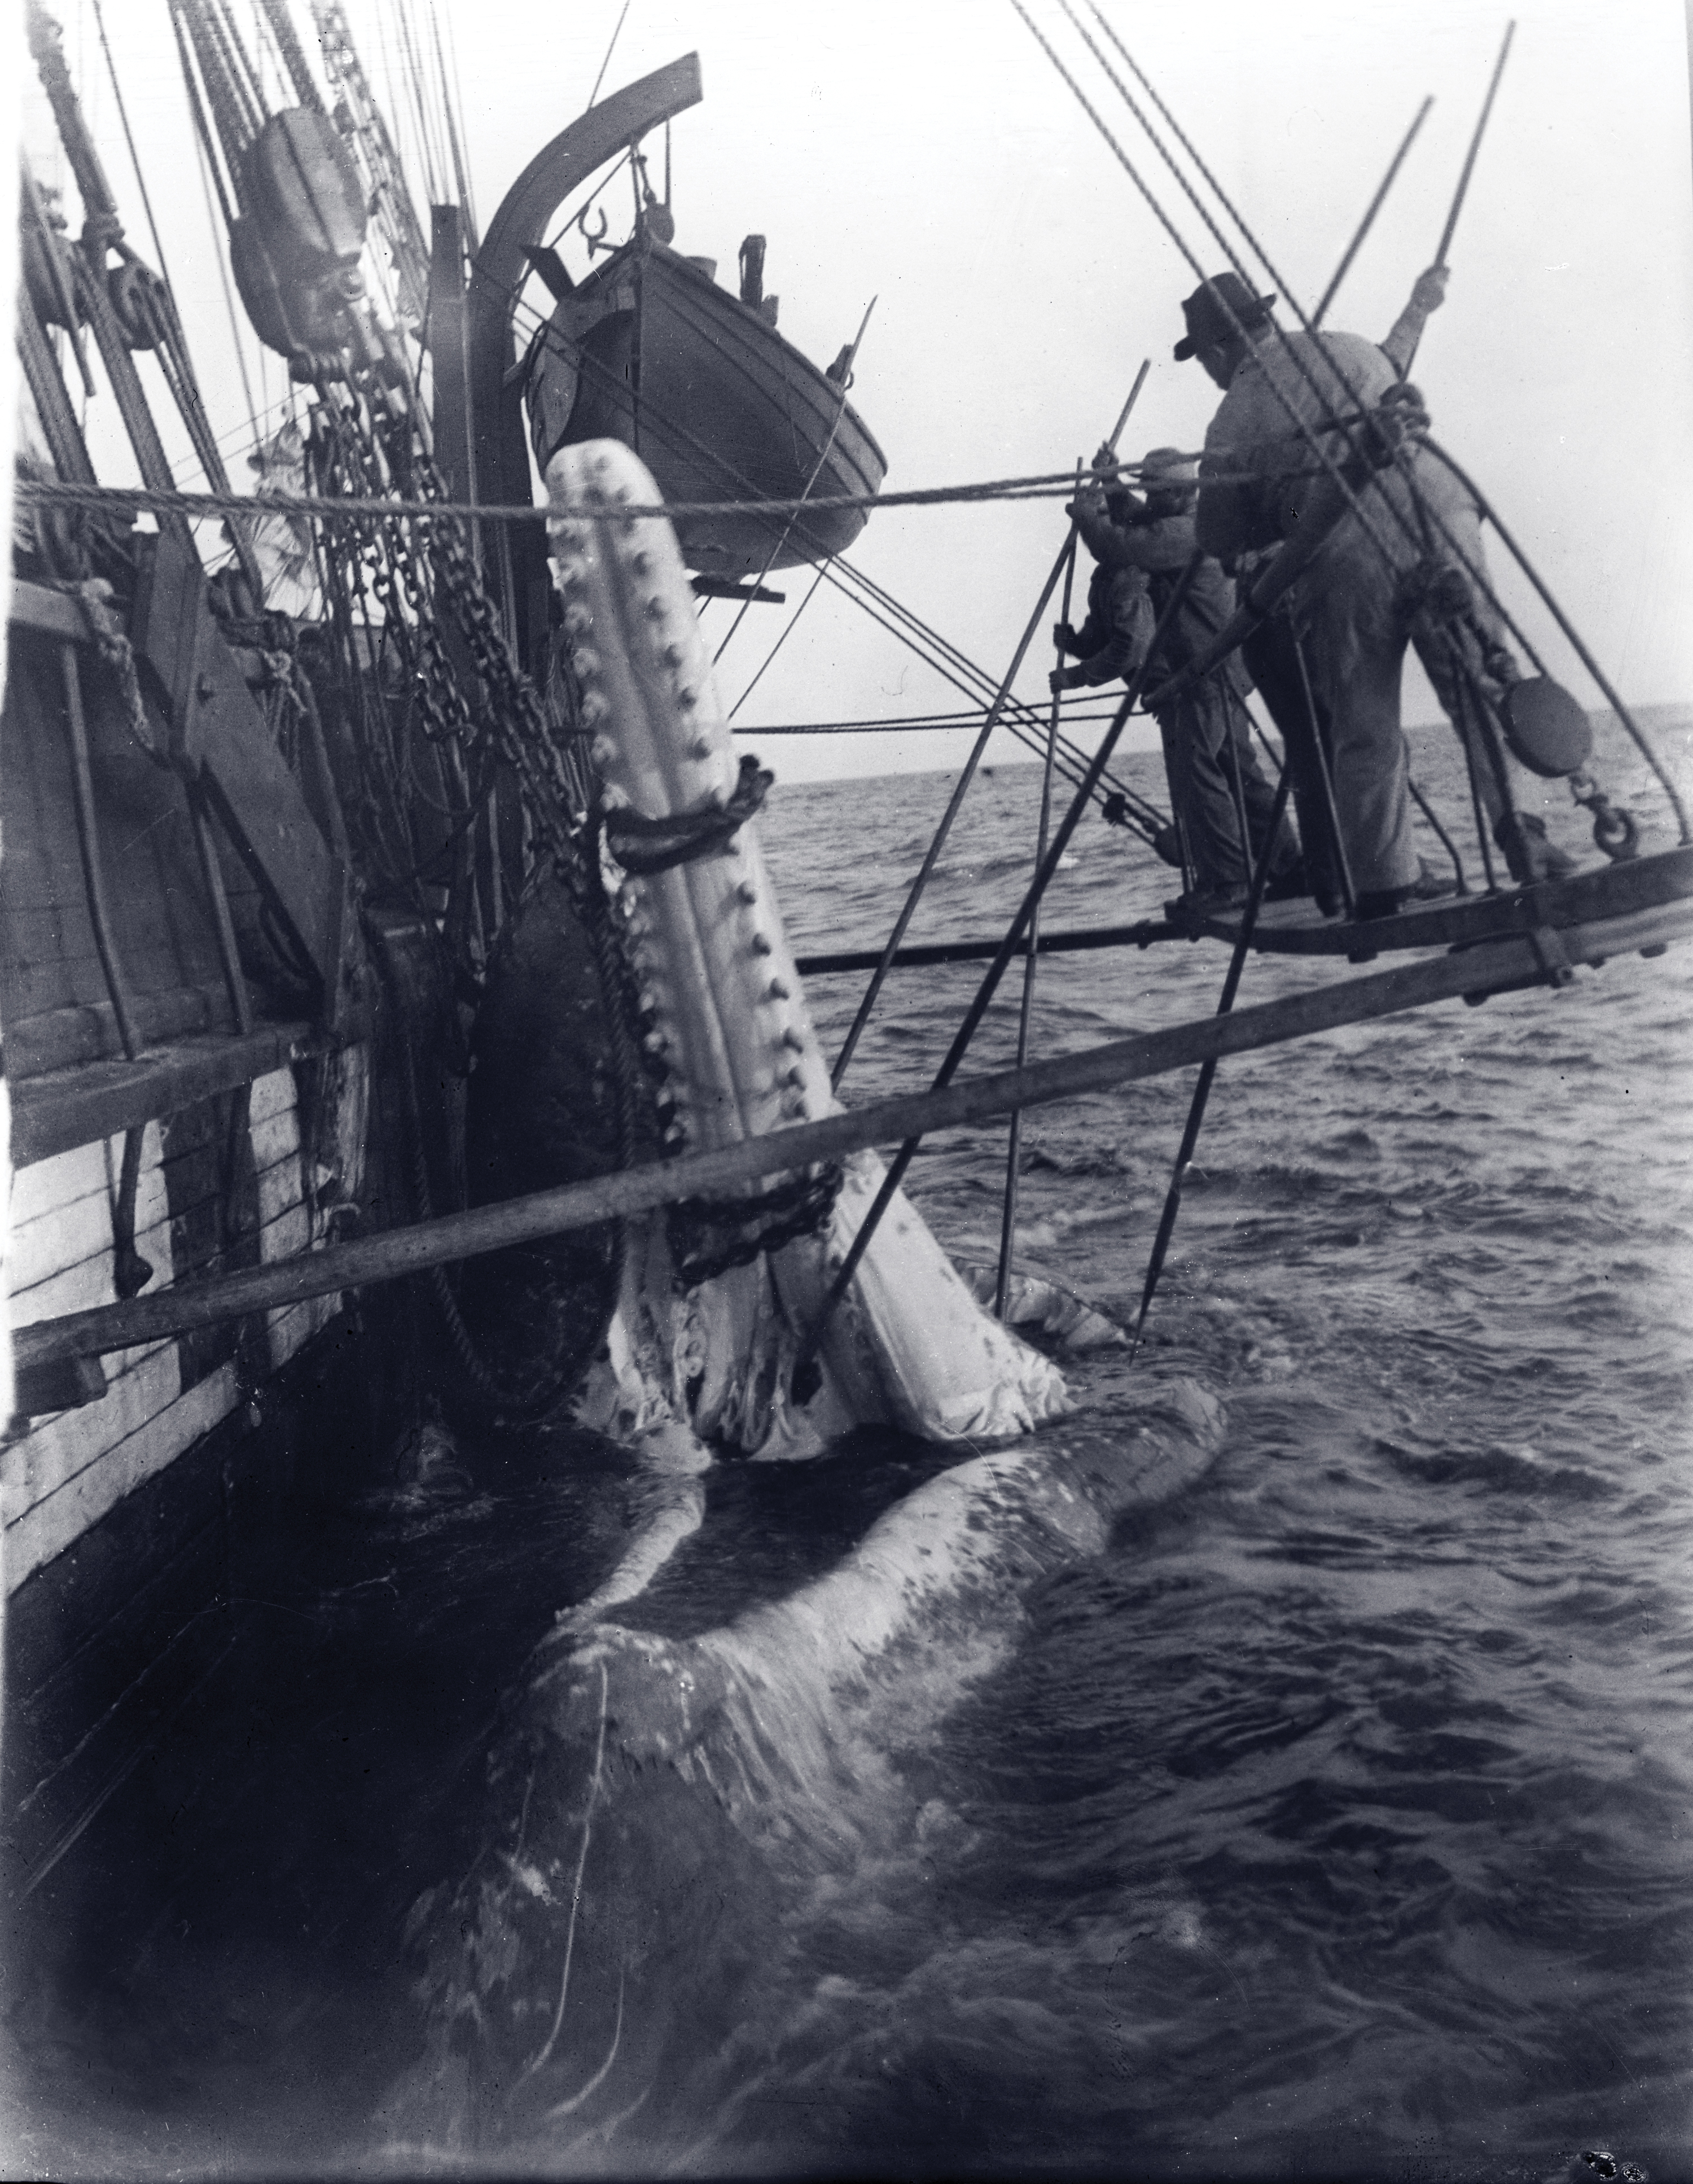 Whaling The Old Way | The National Endowment for the Humanities